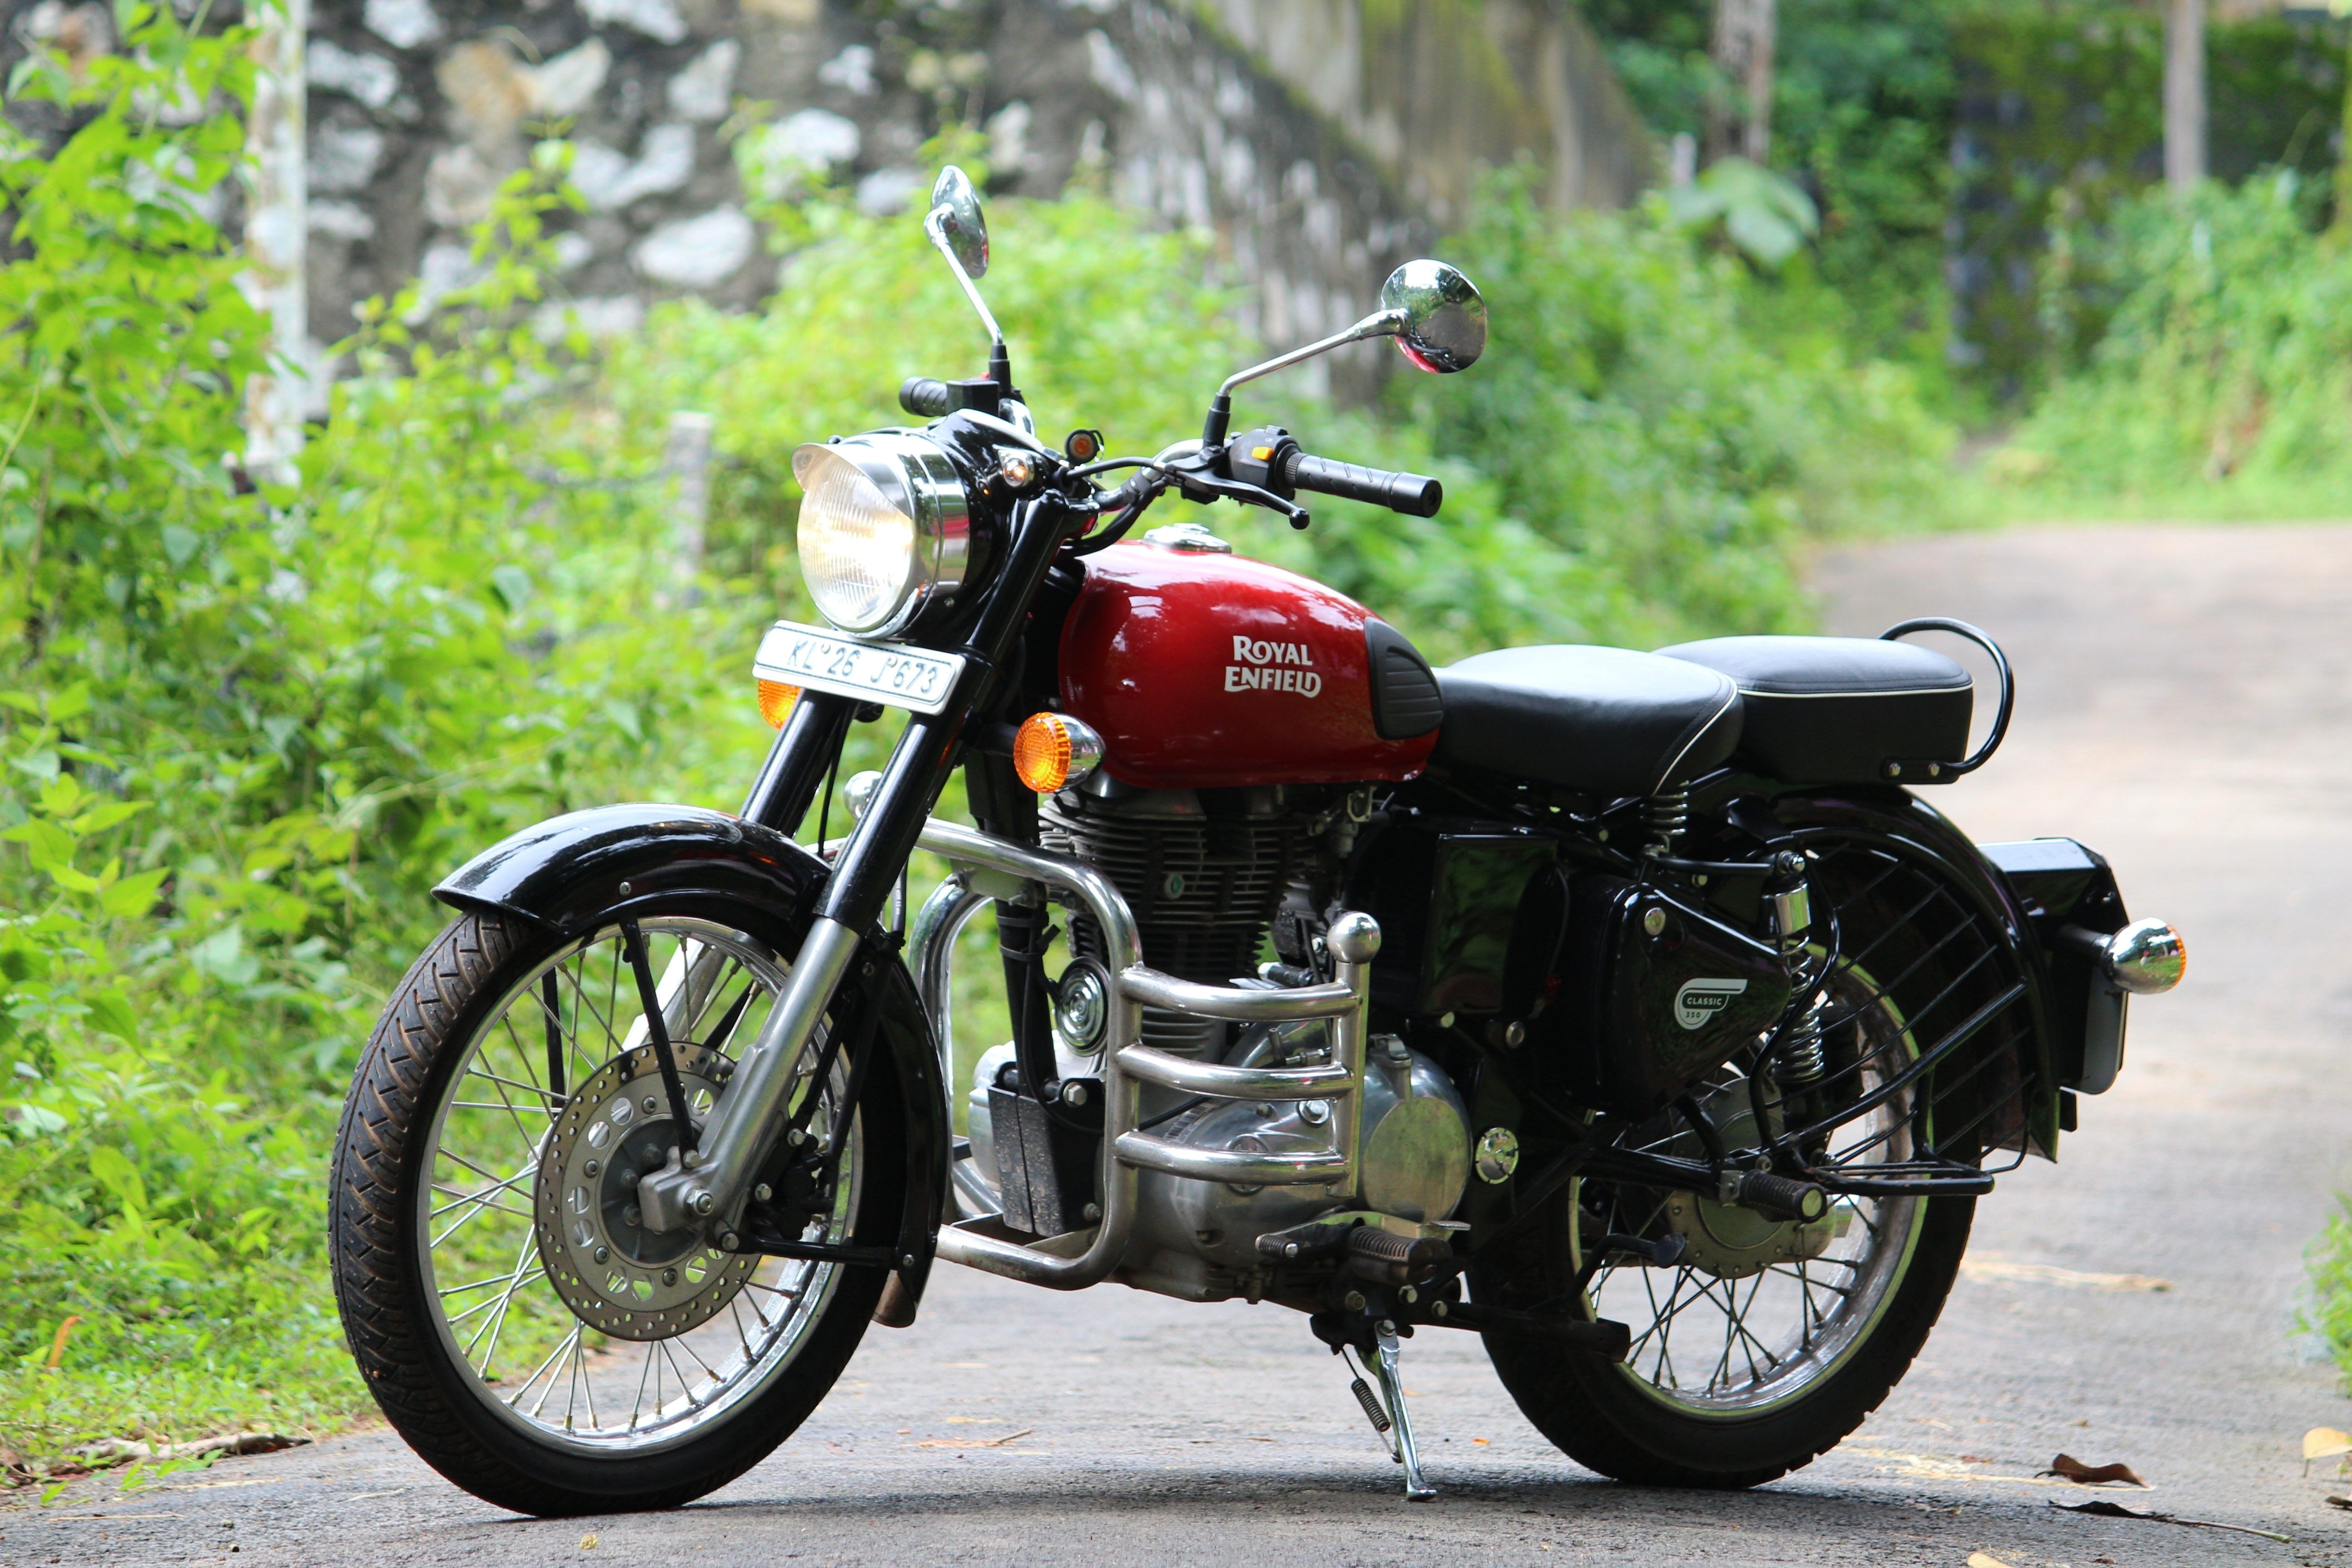 Royal Enfield Bullet motorcycle cafe racer